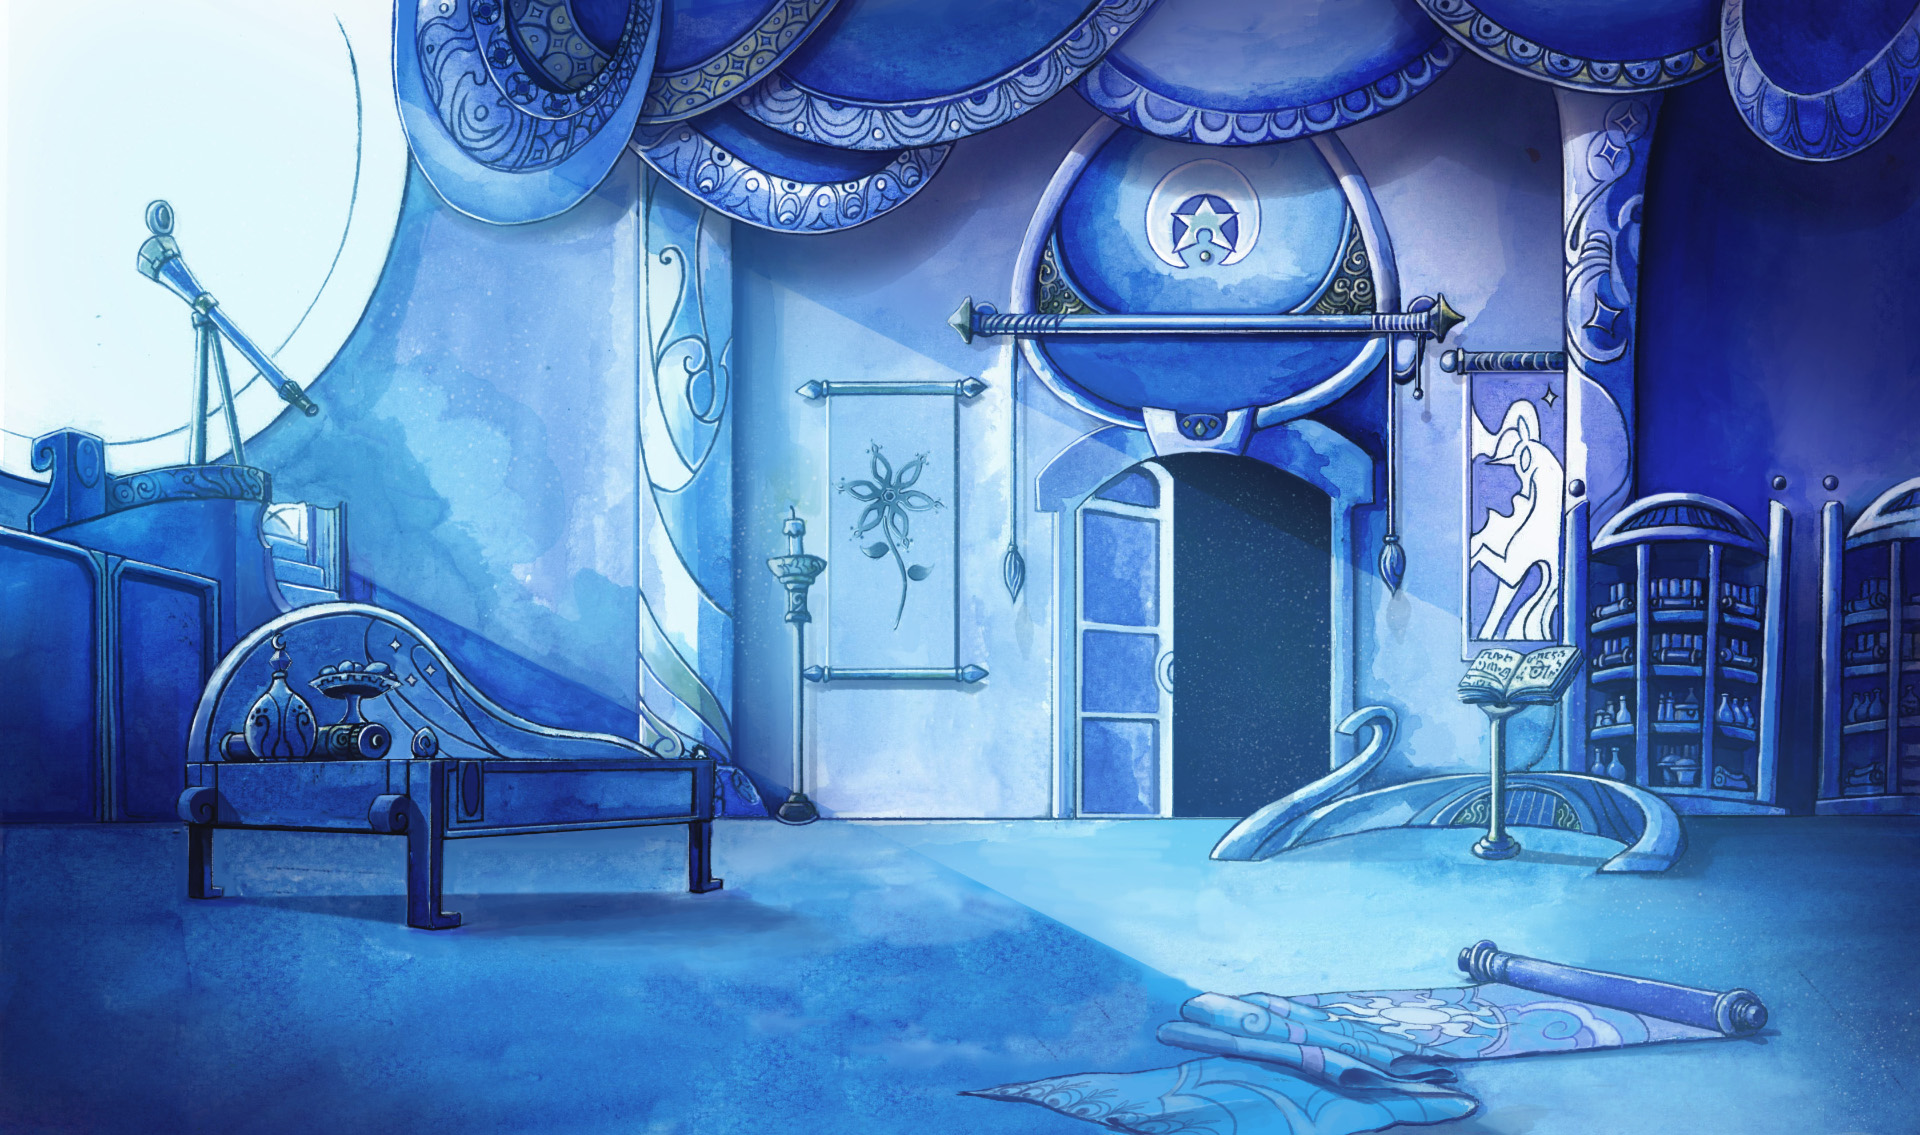 Lullaby for a Princess - Luna's room background by cmaggot on DeviantArt